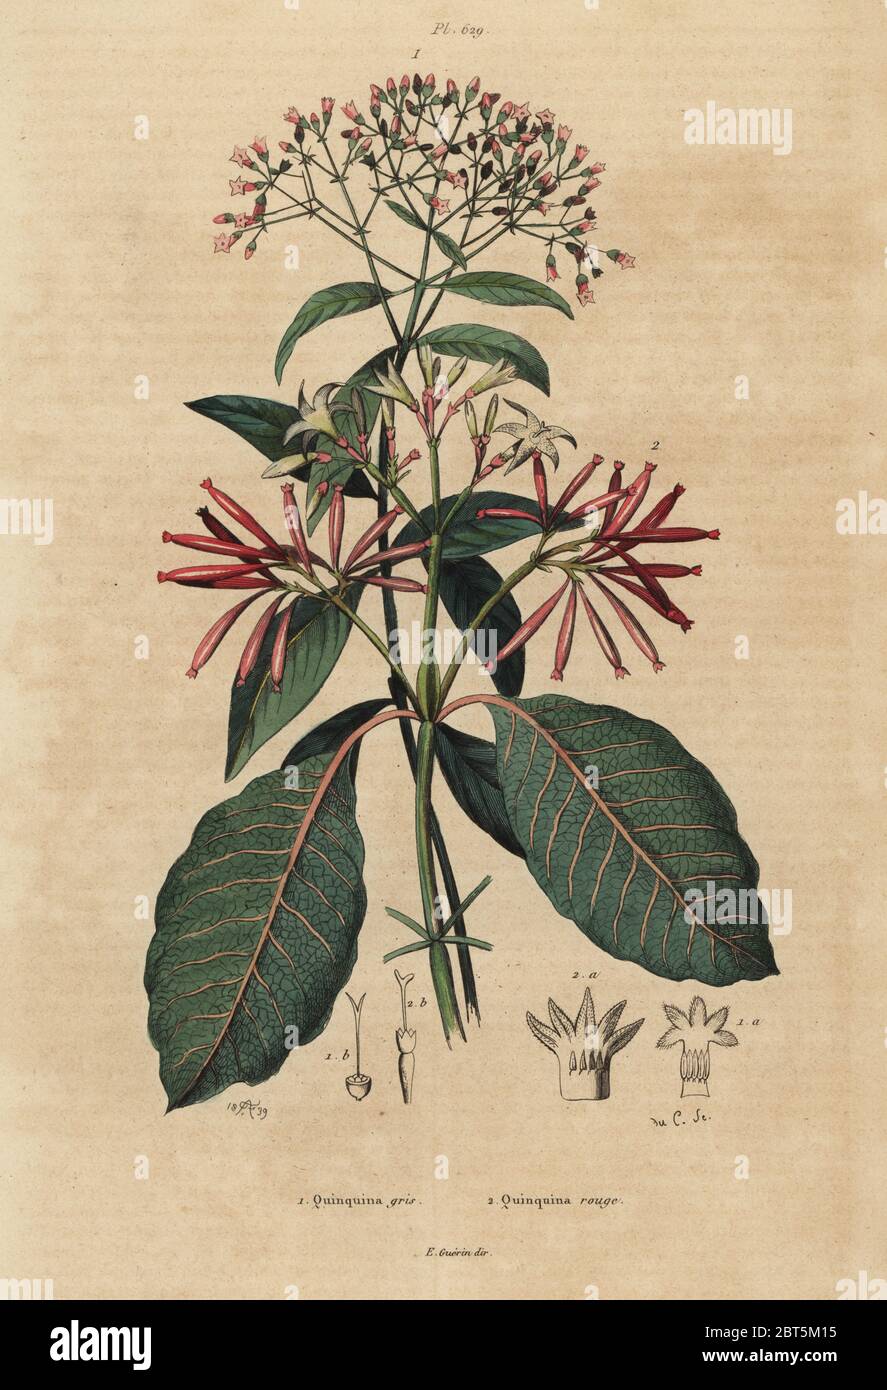 Quinine, Cinchona officinalis 1 and Ladenbergia oblongifolia, vulnerable, 2. Quinquina gris, Quinquina rouge. Handcoloured steel engraving by du Casse after an illustration by Adolph Fries from Felix-Edouard Guerin-Meneville's Dictionnaire Pittoresque d'Histoire Naturelle (Picturesque Dictionary of Natural History), Paris, 1834-39. Stock Photo